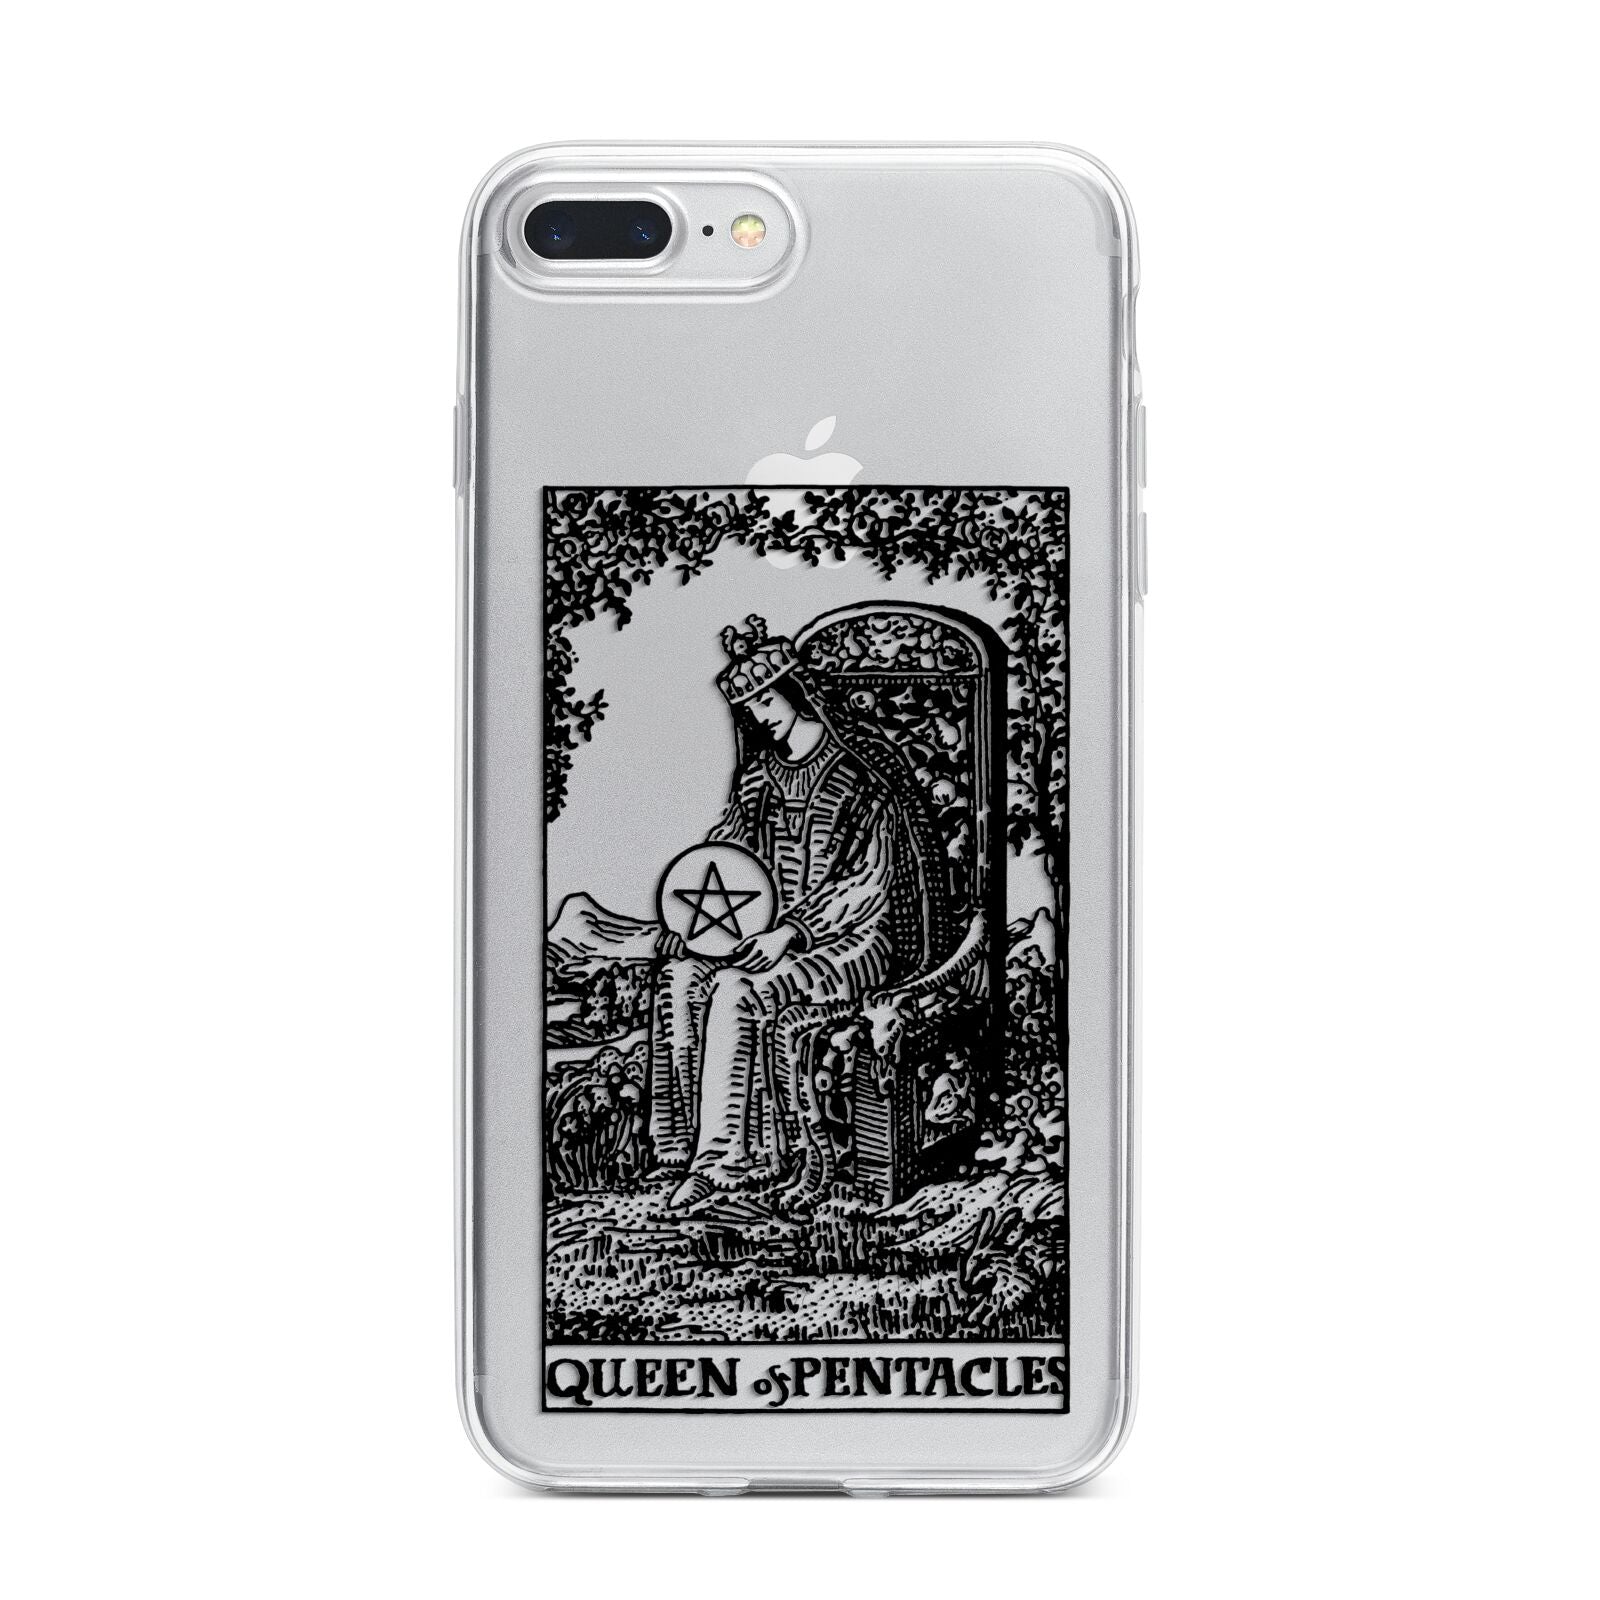 Queen of Pentacles Monochrome iPhone 7 Plus Bumper Case on Silver iPhone